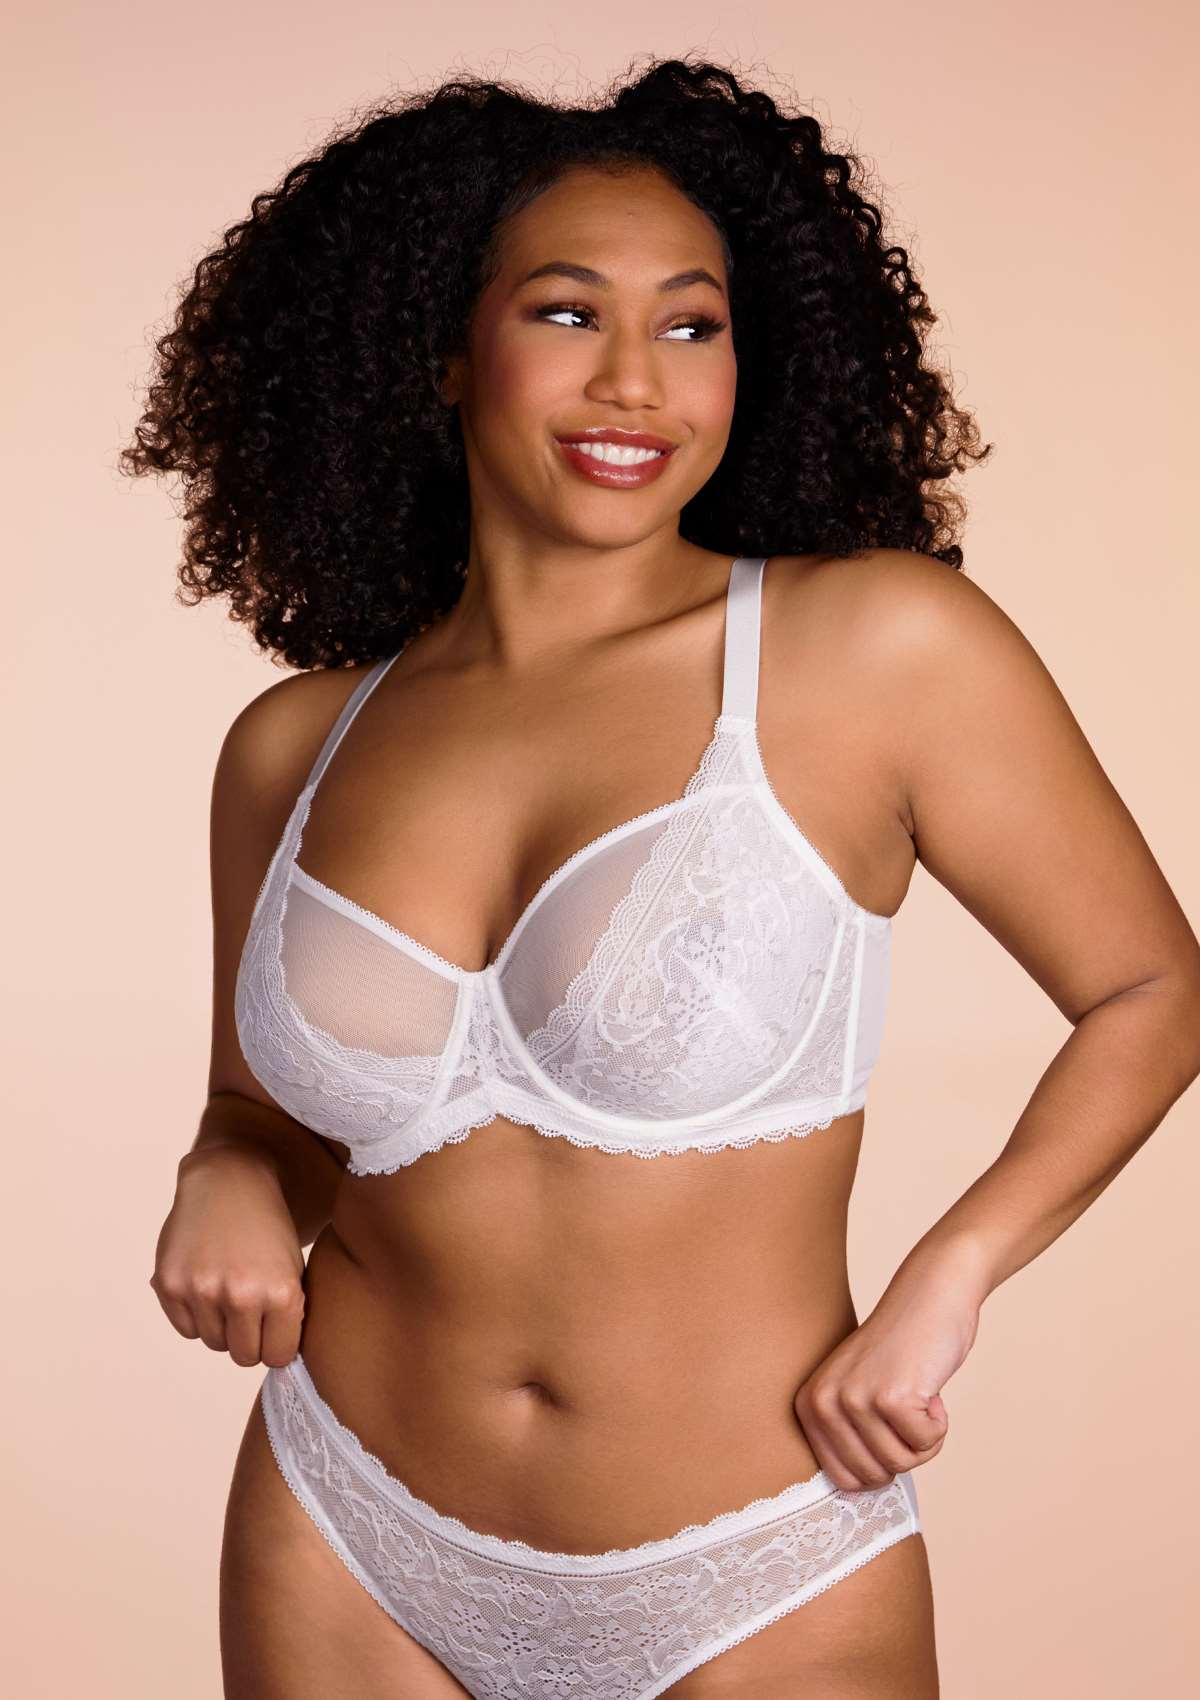 HSIA Anemone Big Bra: Best Bra For Lift And Support, Floral Bra - White / 34 / D